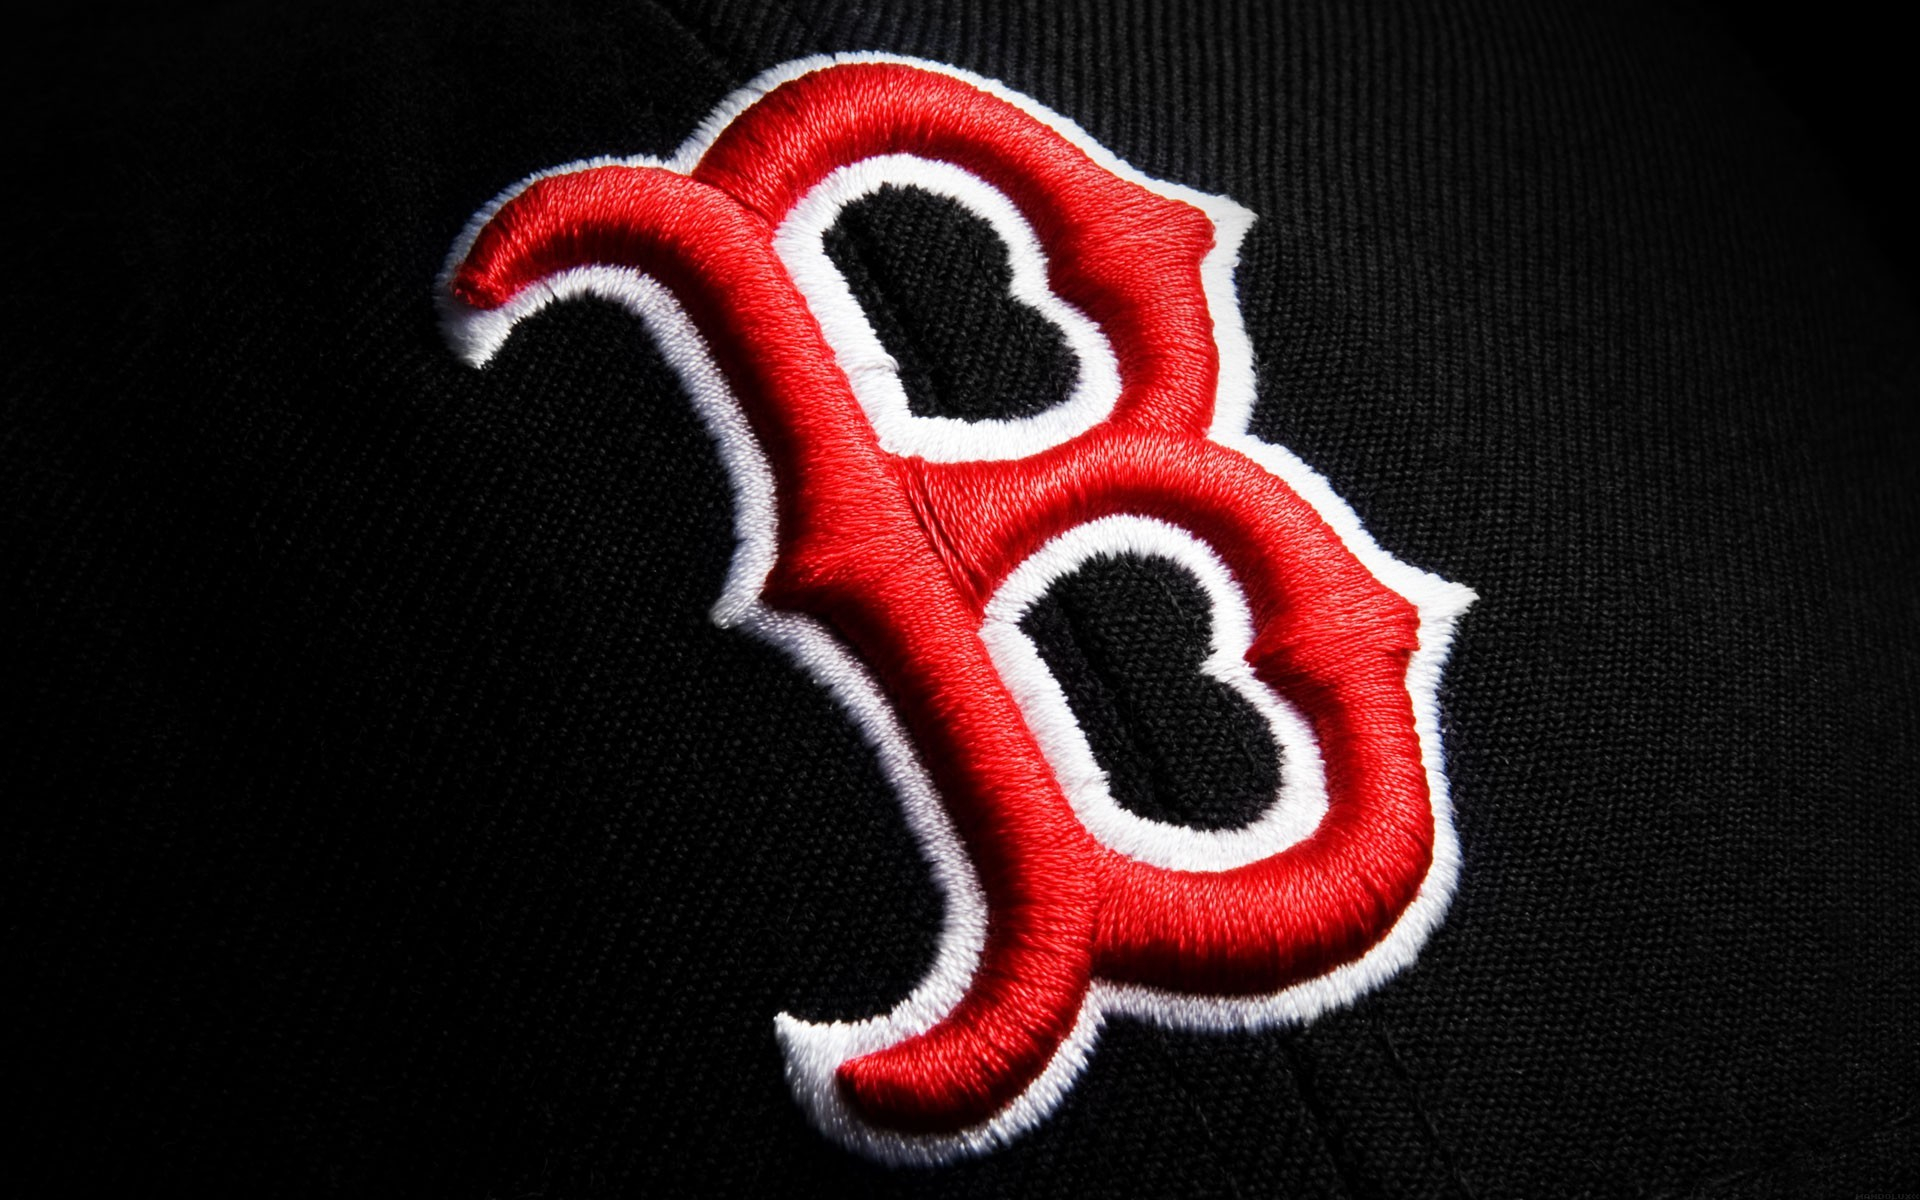 1920x1200 Wallpaper : red, logo, brand, Boston, Red Sox, number, font, organ rlaboy777 249892 HD Wallpapers